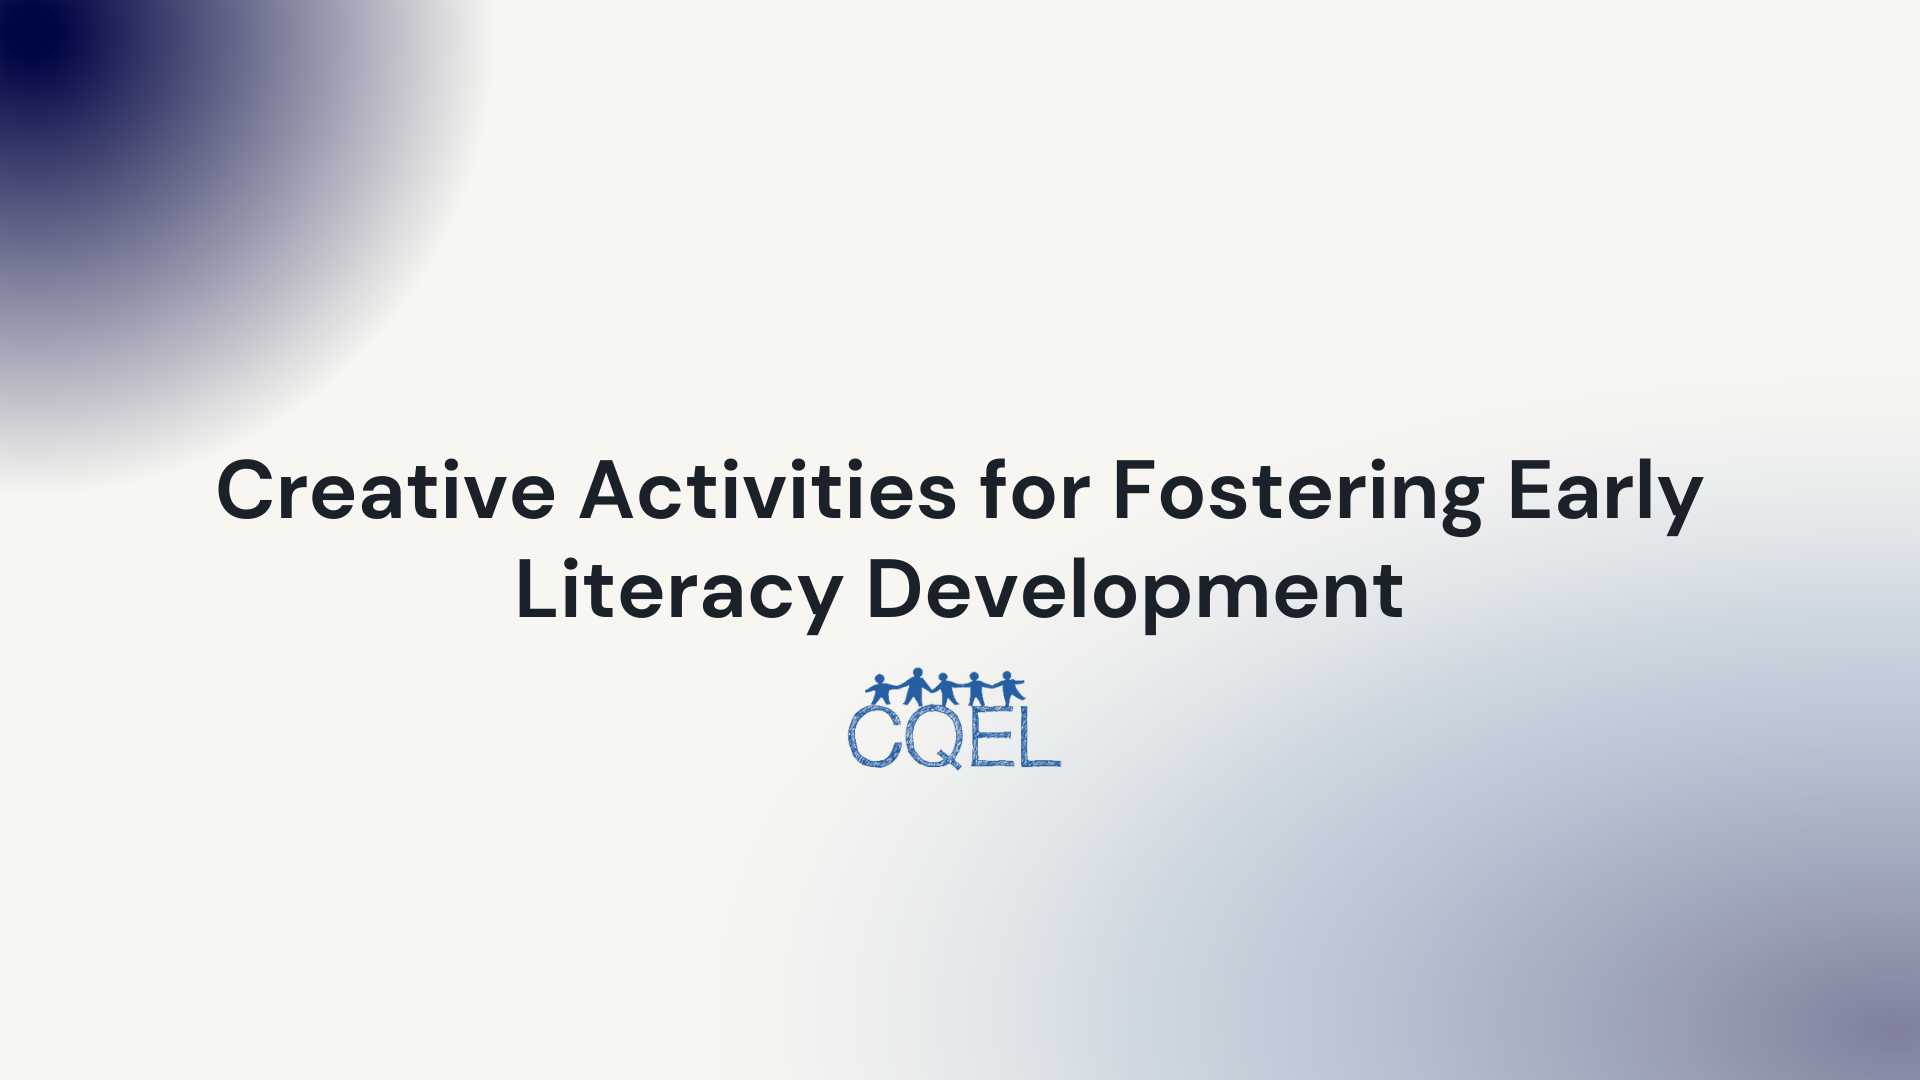 Creative Activities for Fostering Early Literacy Development